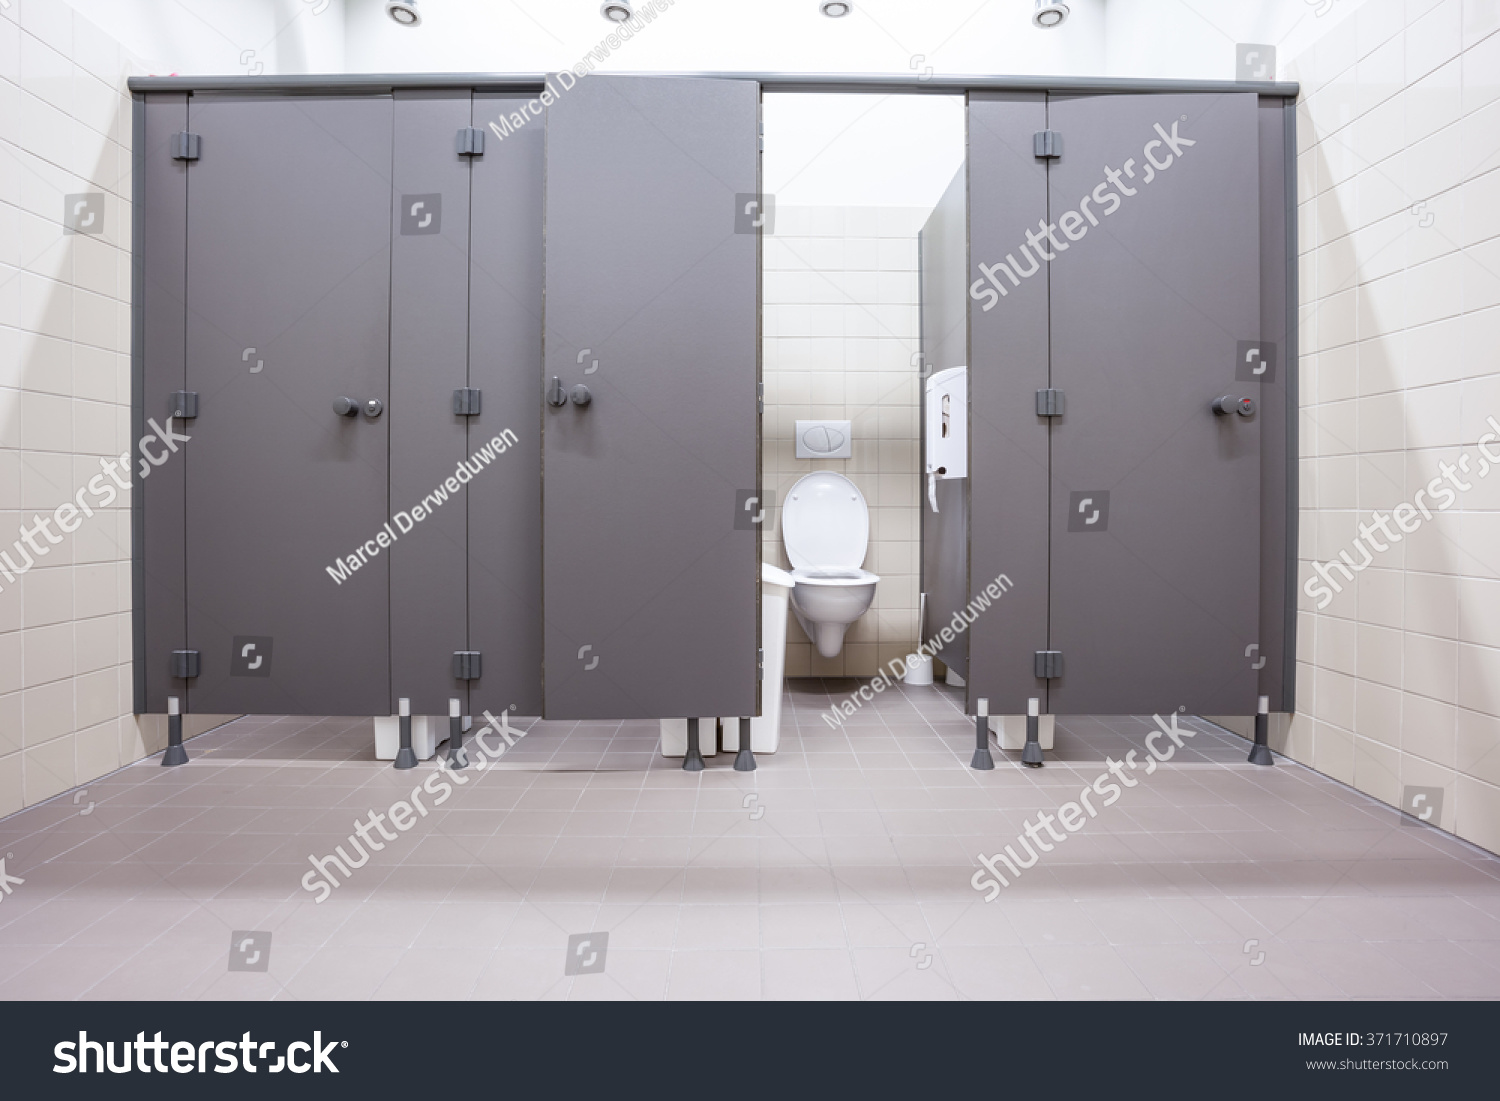 In an public building are womans toilets whit black doors #371710897